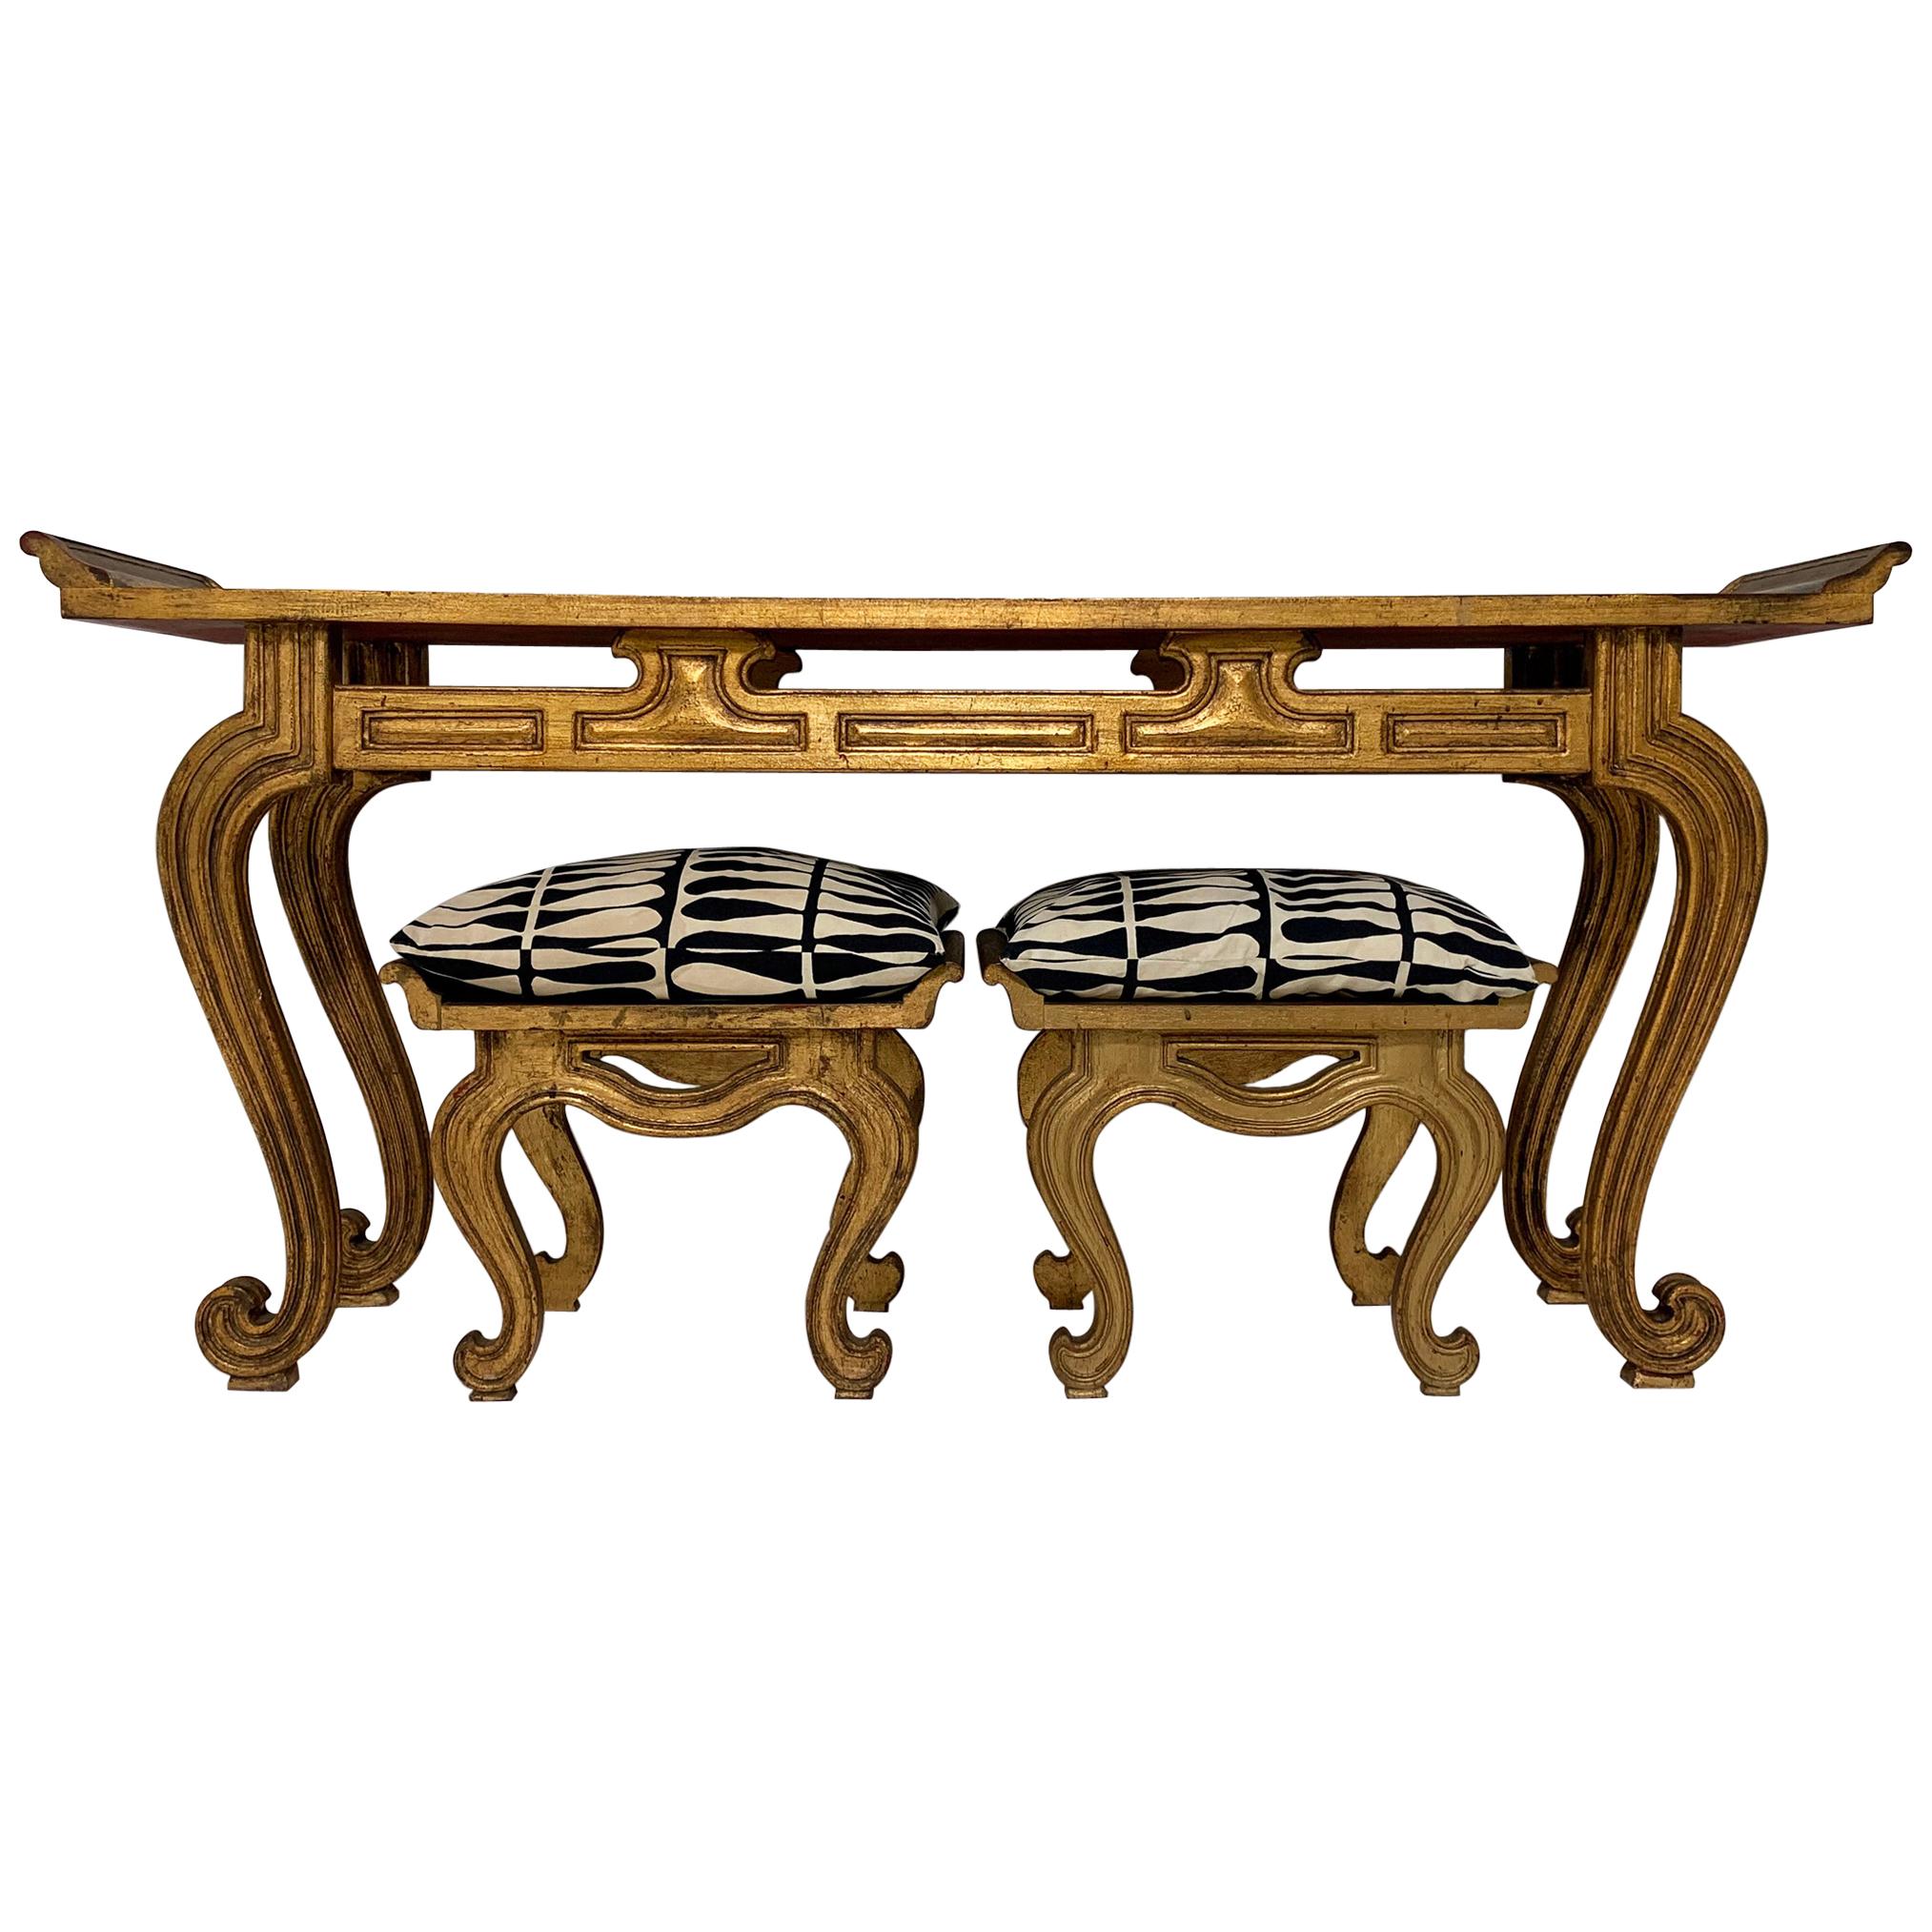 Francisco Hurtado Carved Giltwood Console Table and Stools, circa 1950s